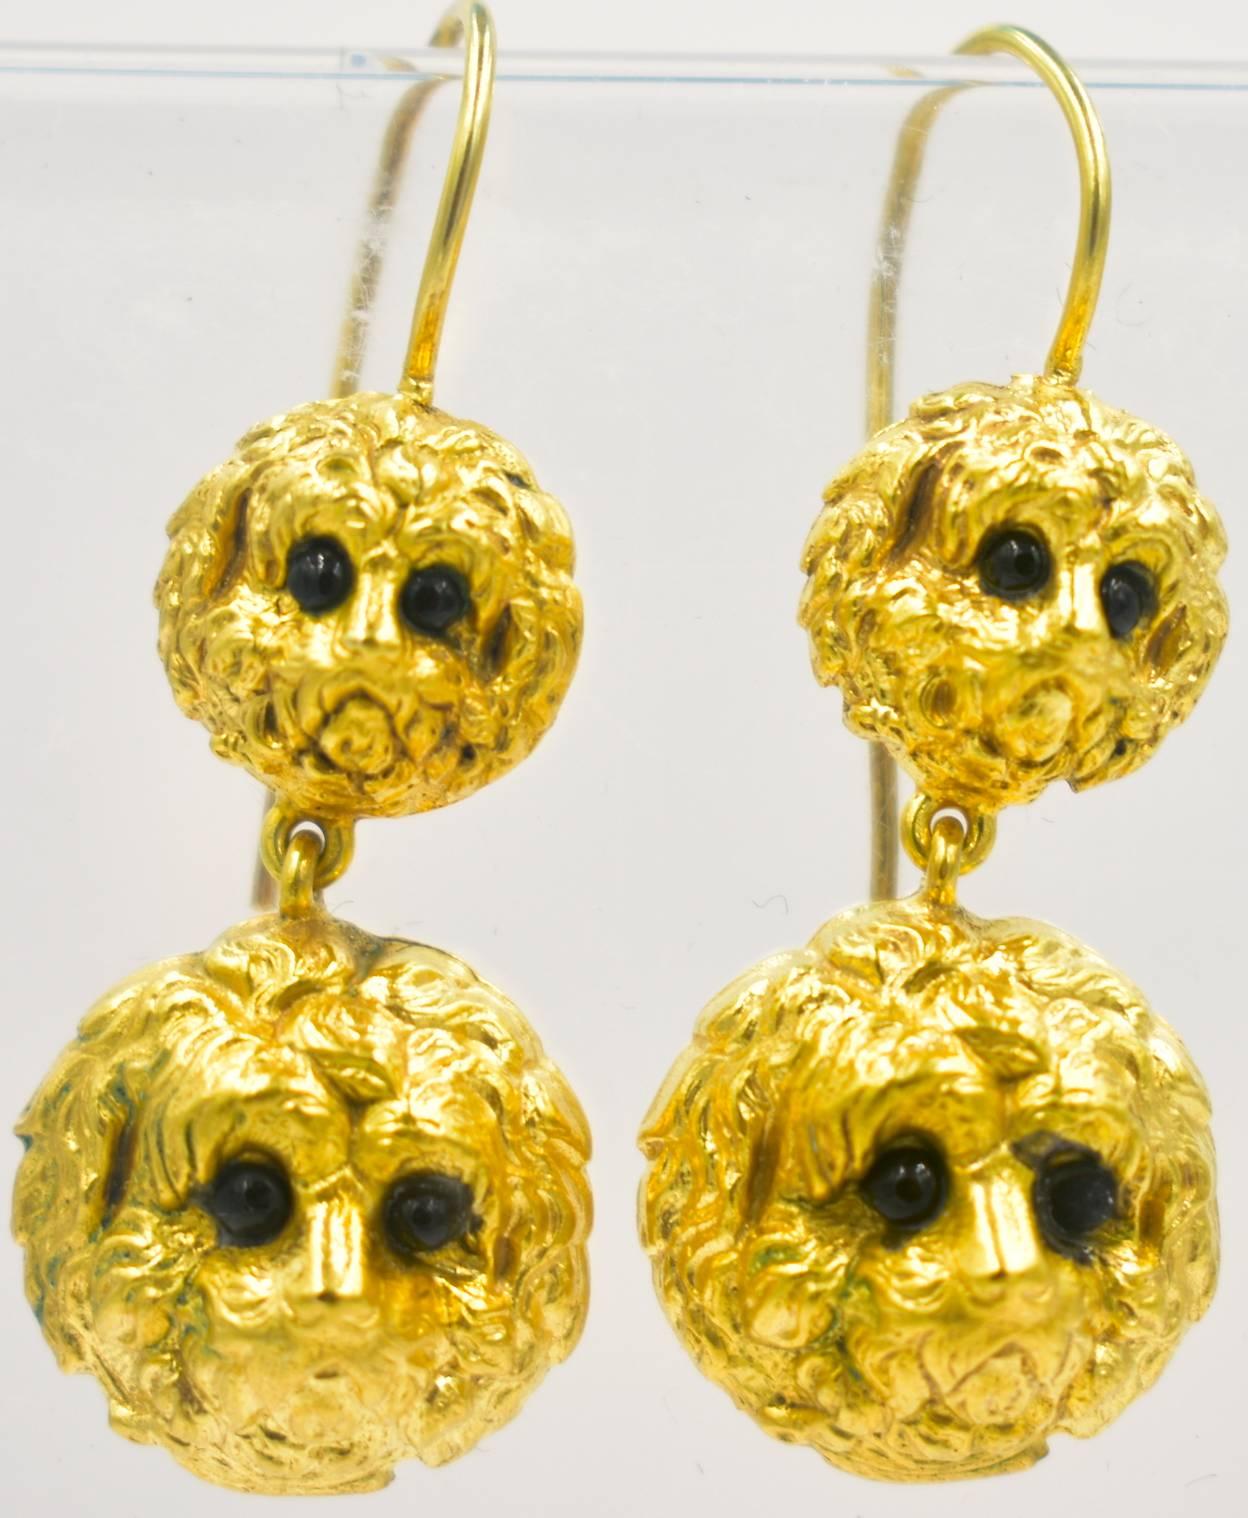 Delightful Victorian dog head earrings of pinchbeck set with black glass eyes. Pinchbeck is an alloy named for Christopher Pinchbeck who was a watchmaker and developed the alloy for his watch cases. It has no gold in it but does not tarnish and